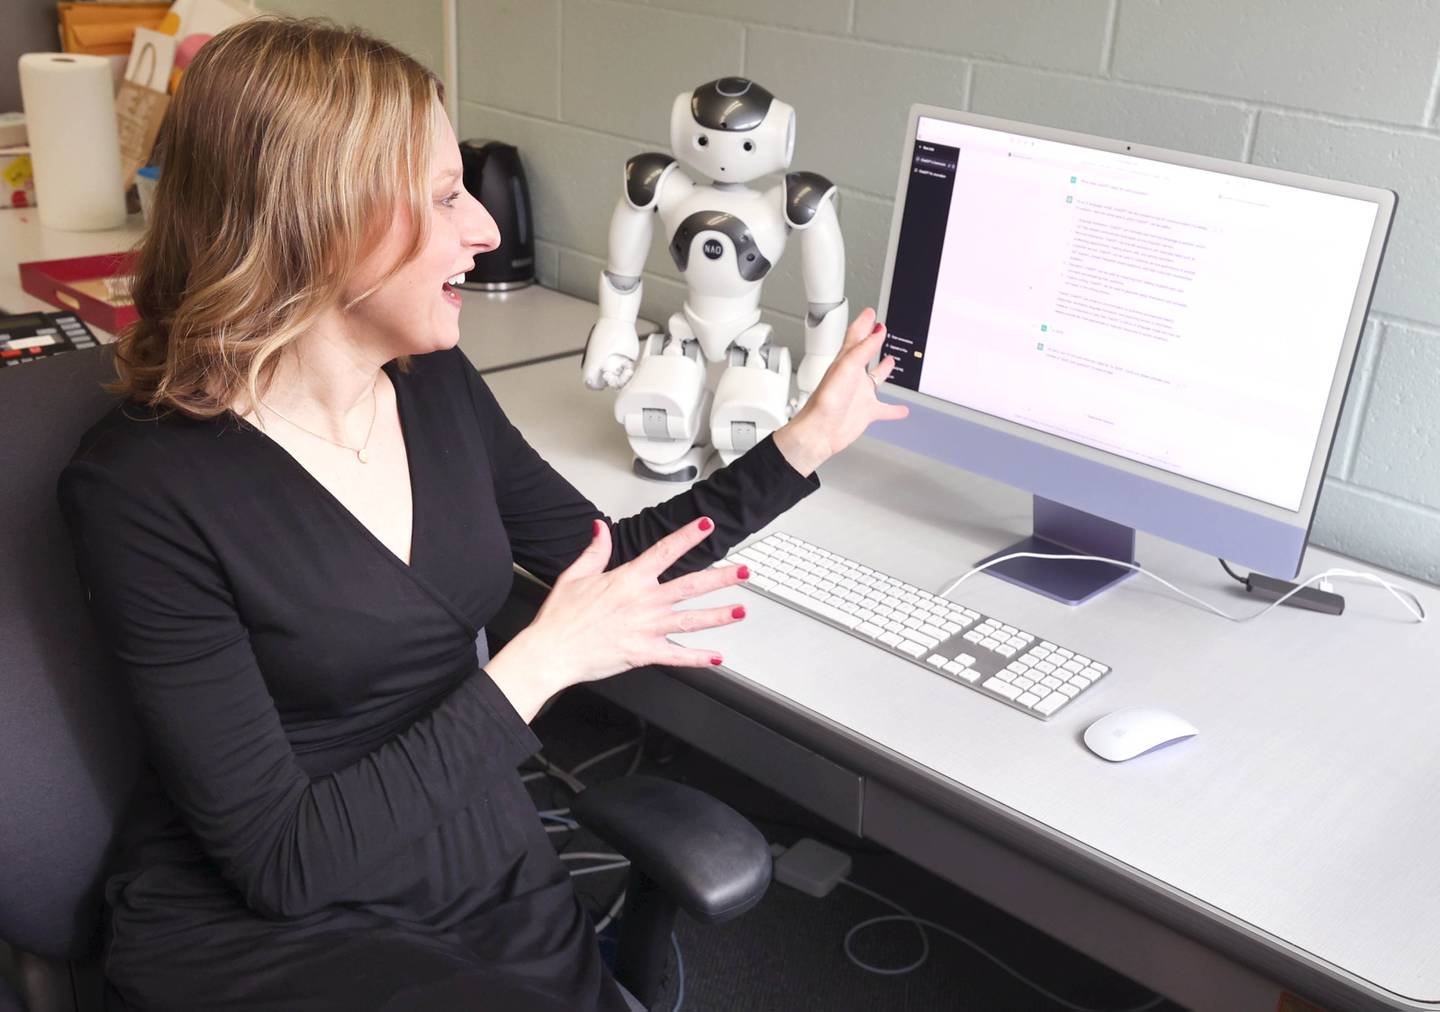 Andrea Guzman, associate professor of communications at Northern Illinois University, talks Thursday, March 30, 2023, in Reavis Hall at NIU, about ChatGPT, an artificial-intelligence chatbot.